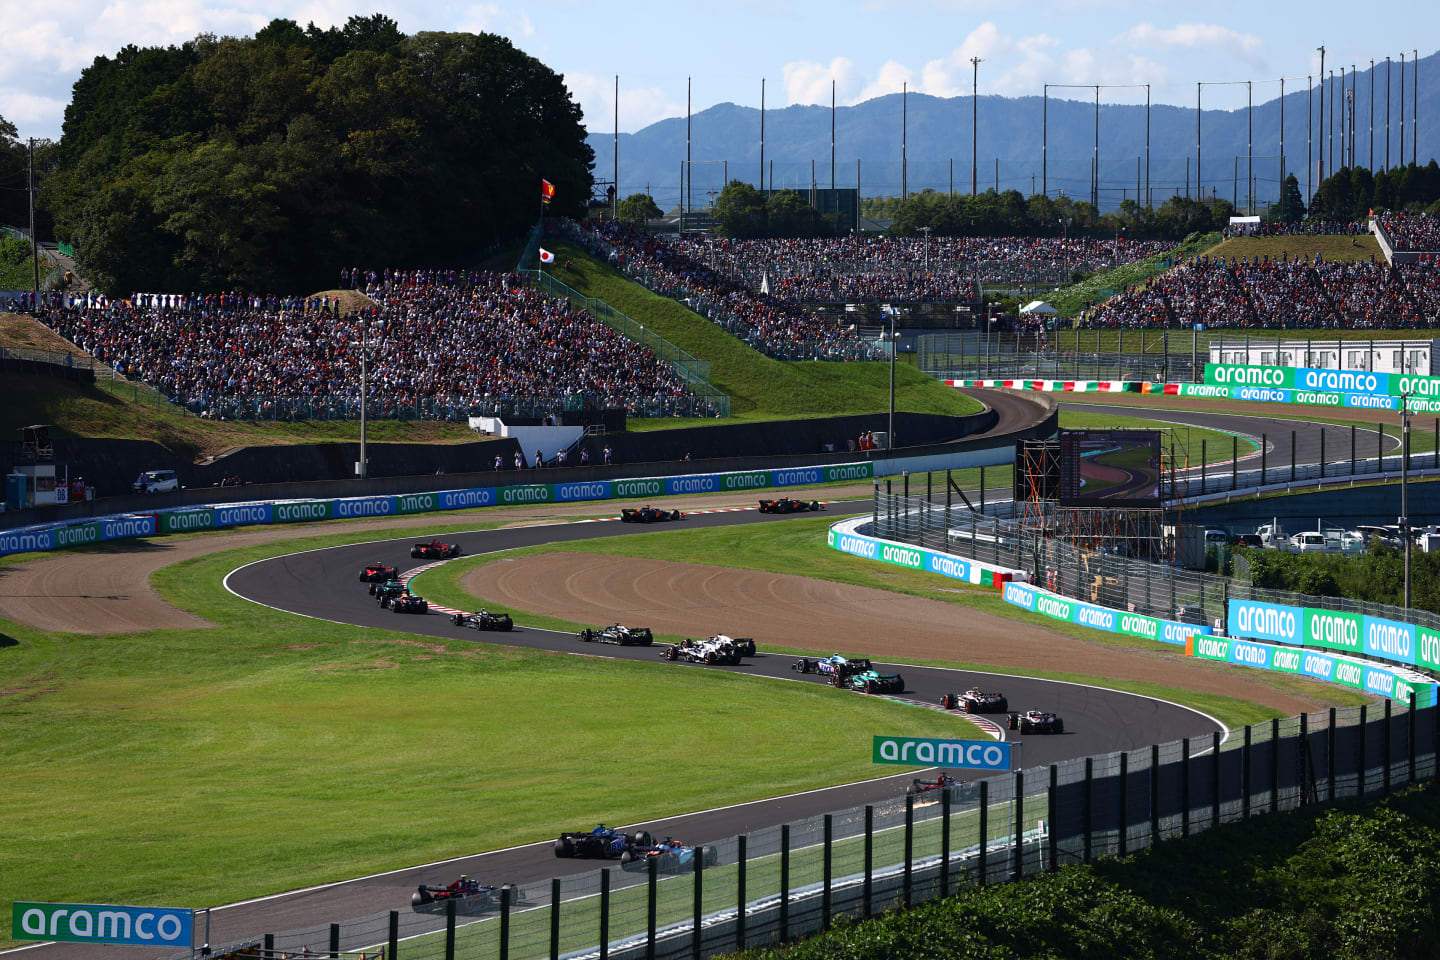 SUZUKA, JAPAN - SEPTEMBER 24: A rear view of the start of the race during the F1 Grand Prix of